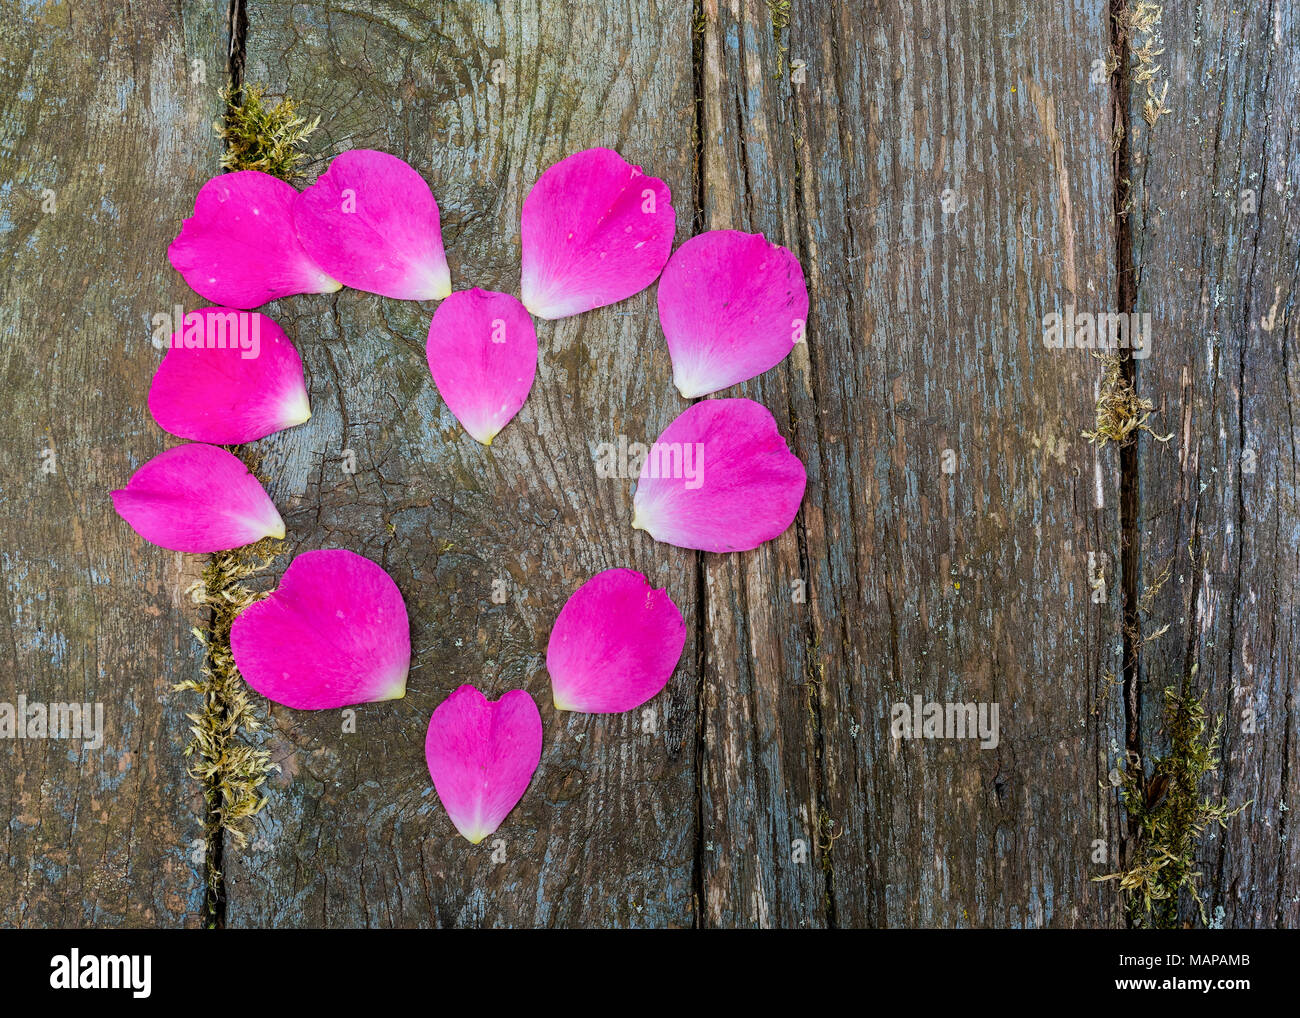 Pink rose petals on an old board background. Stock Photo